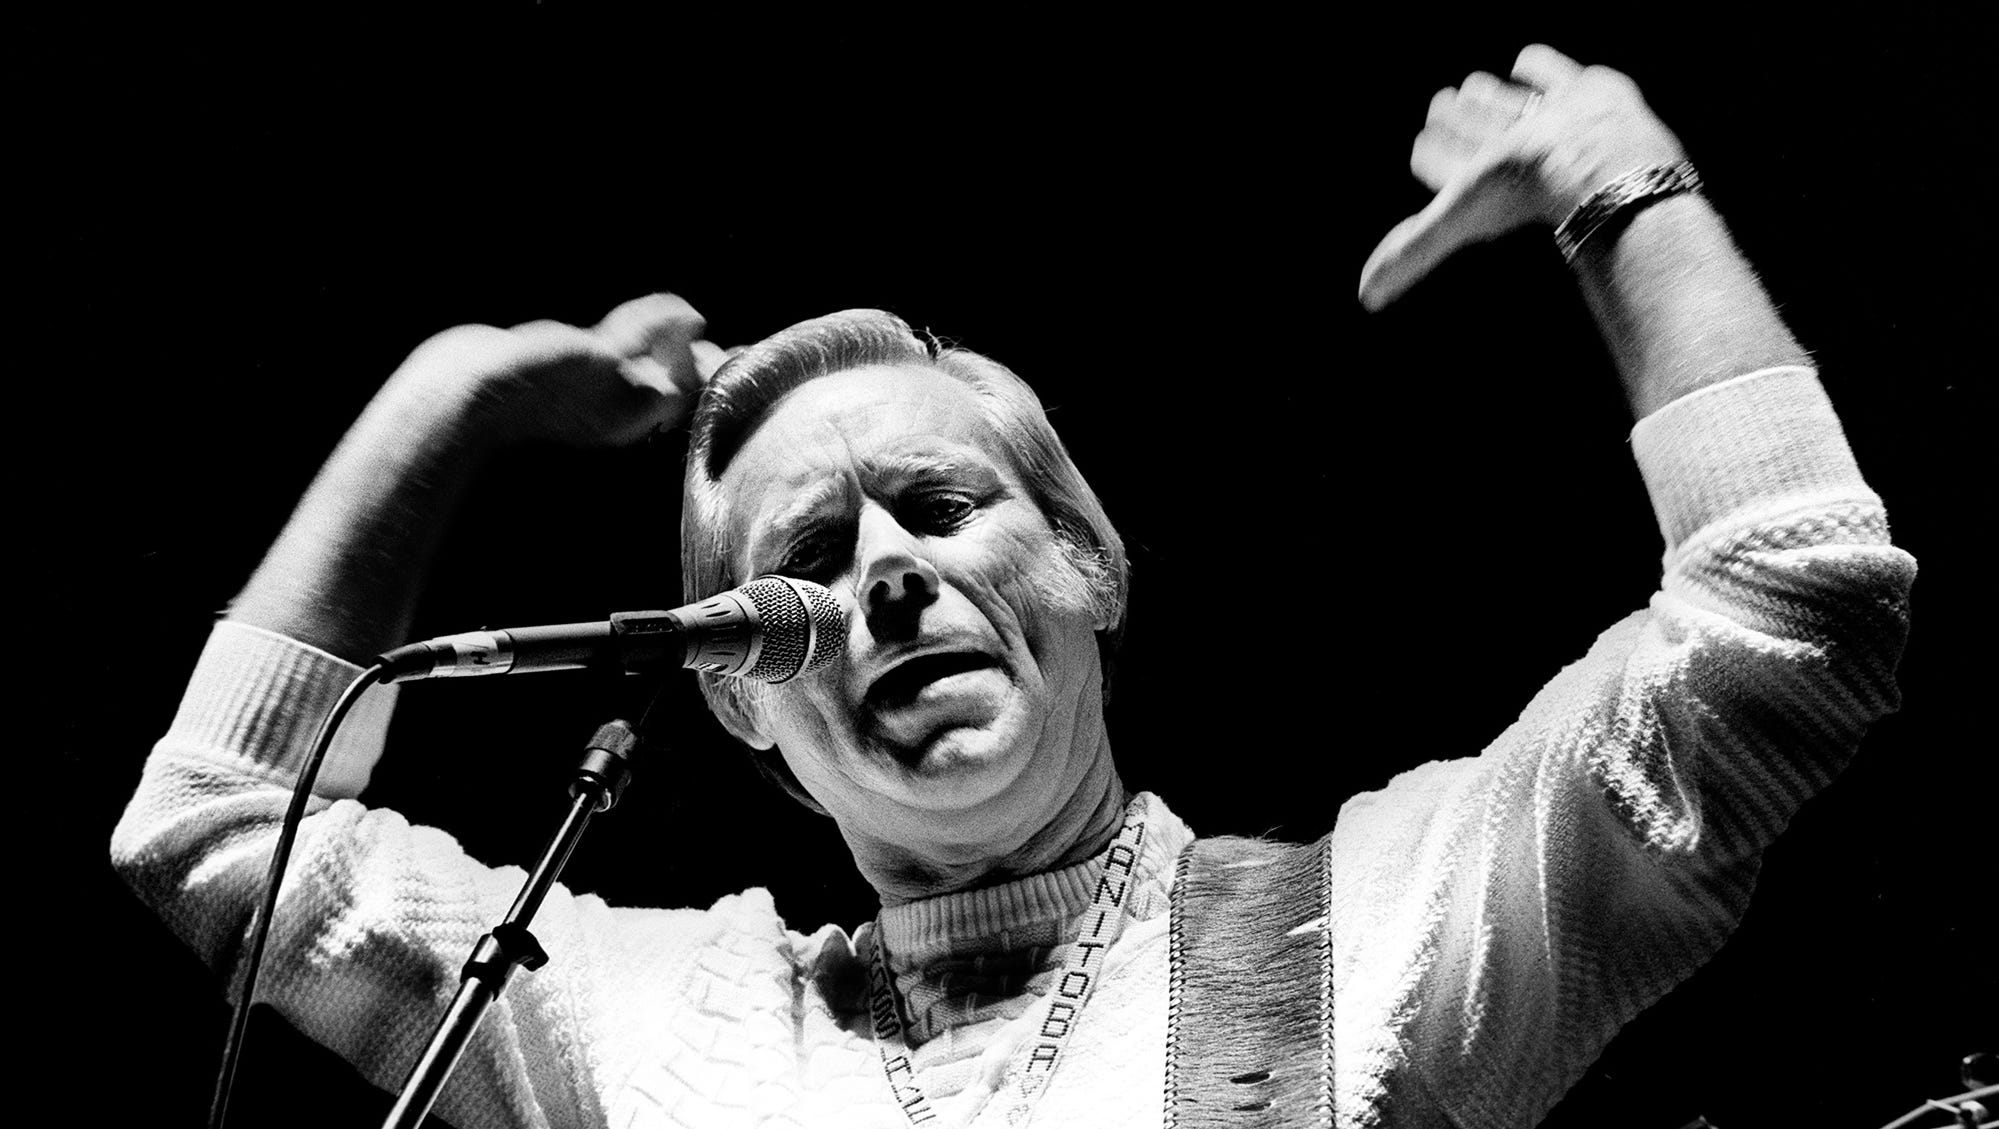 Country music superstar George Jones lights into "No Show Jones" to kick off his performance as part of the Starwood Amphitheatre concert, which also starred Merle Haggard. More than 12,000 fans turned out for a night of music by the hard-country legends July 24, 1987.